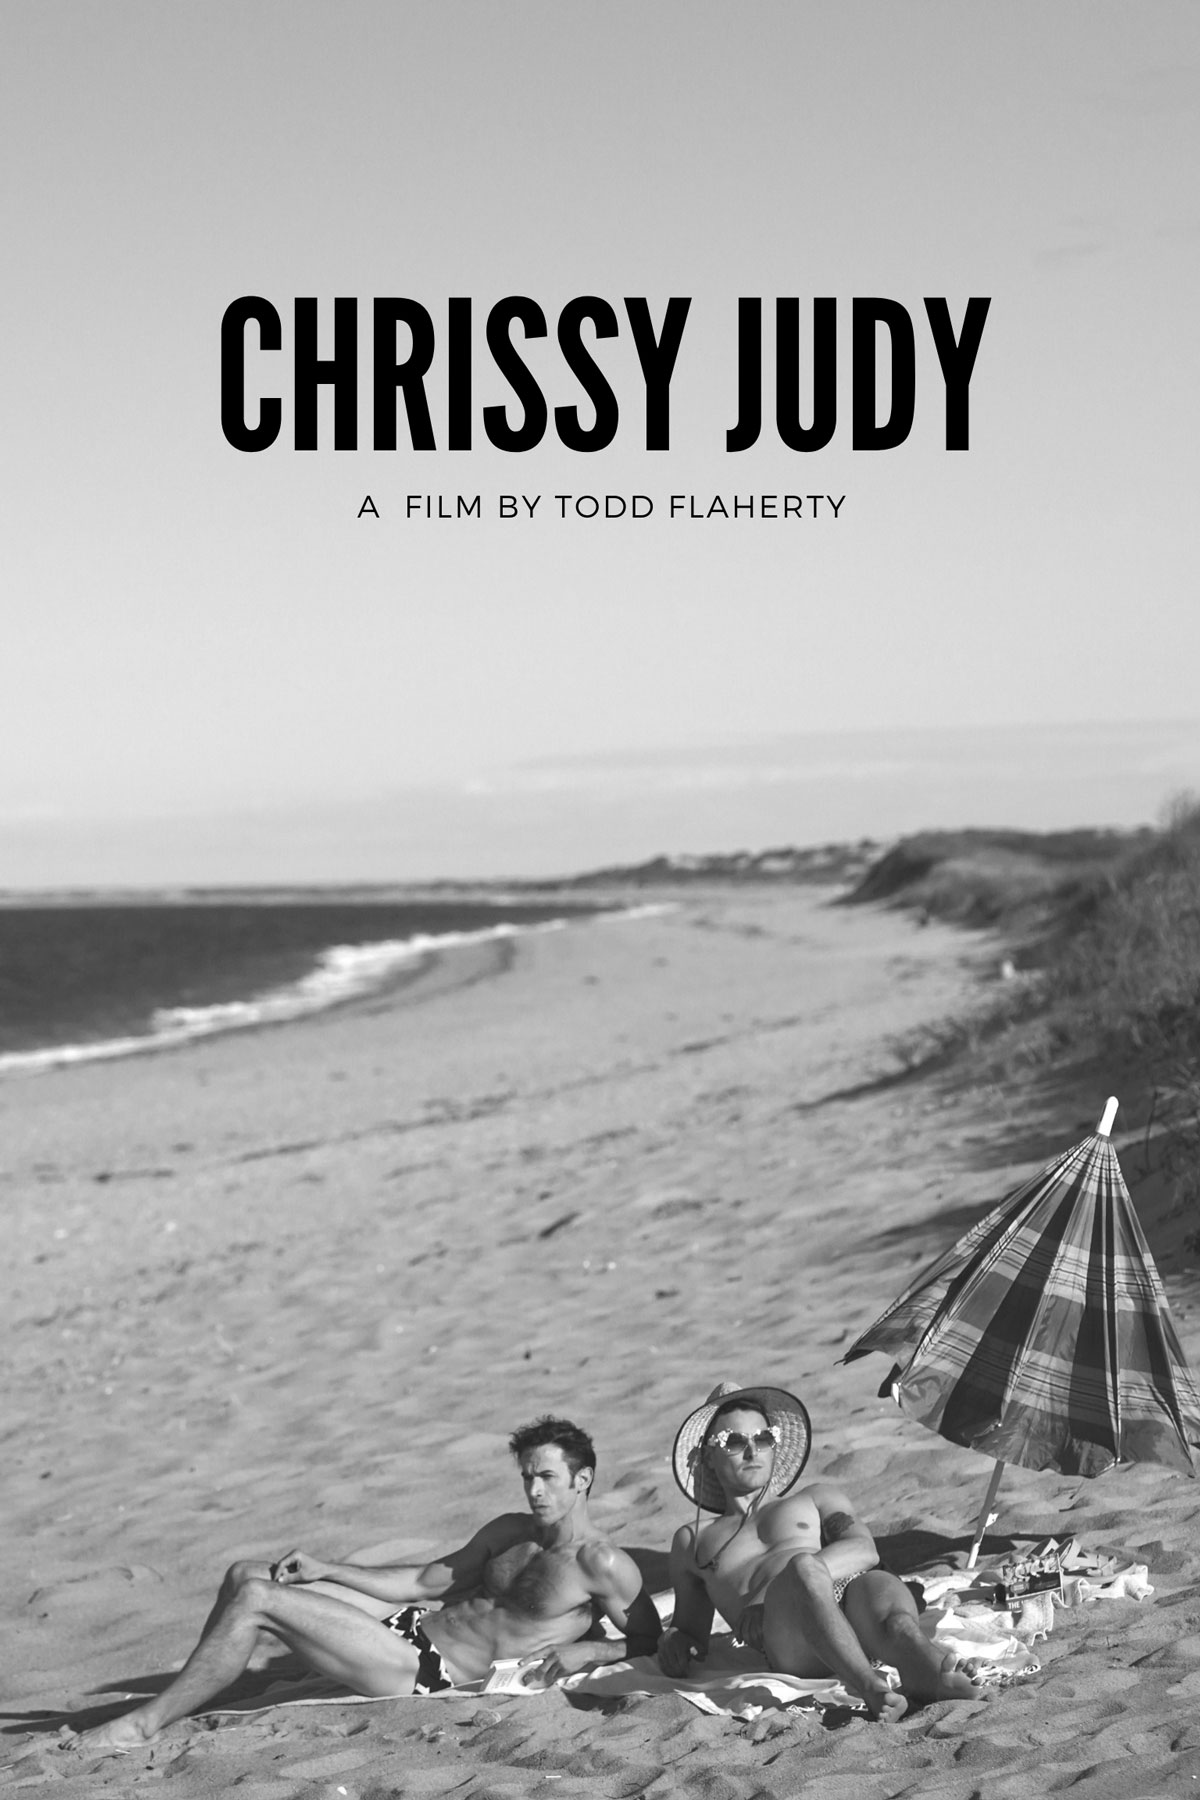 OFF_Chrissy Judy_poster